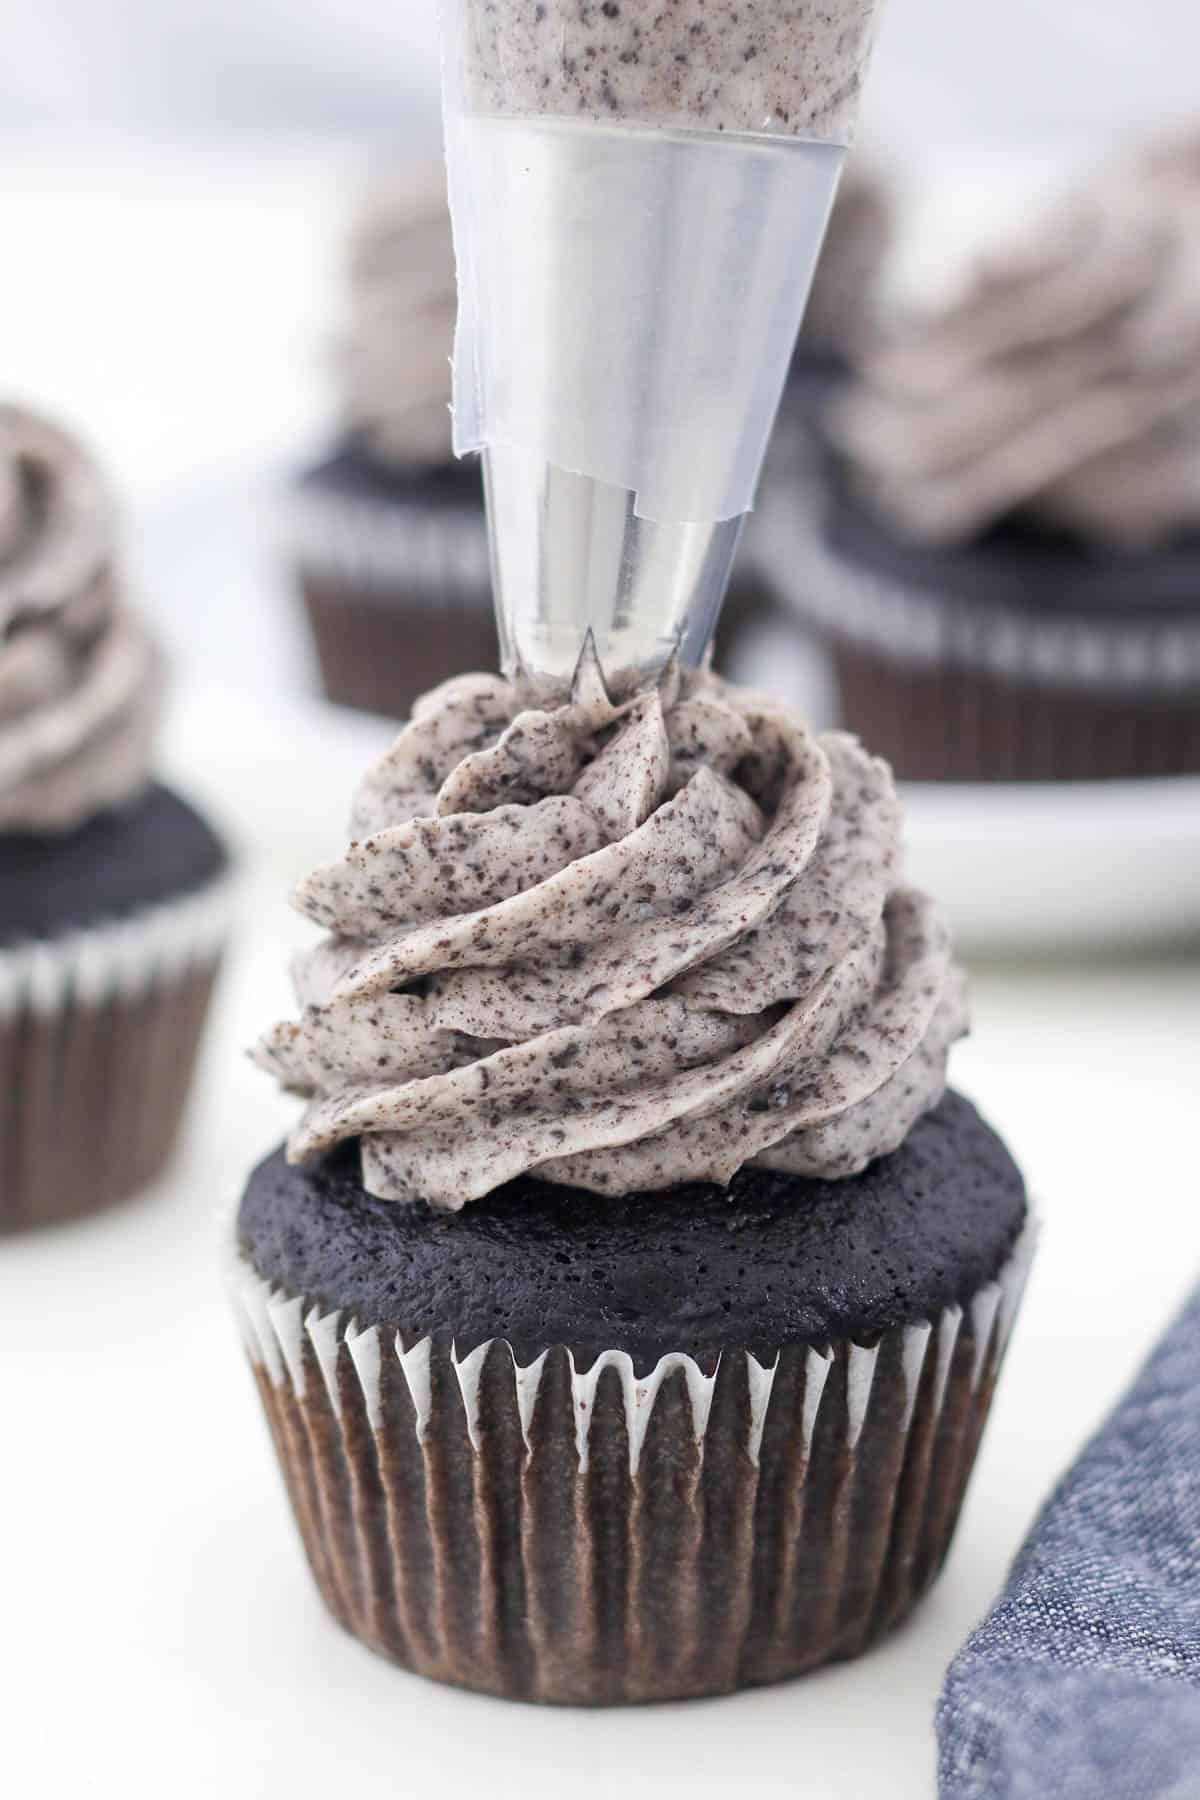 Oreo frosting being piped onto a chocolate cupcake